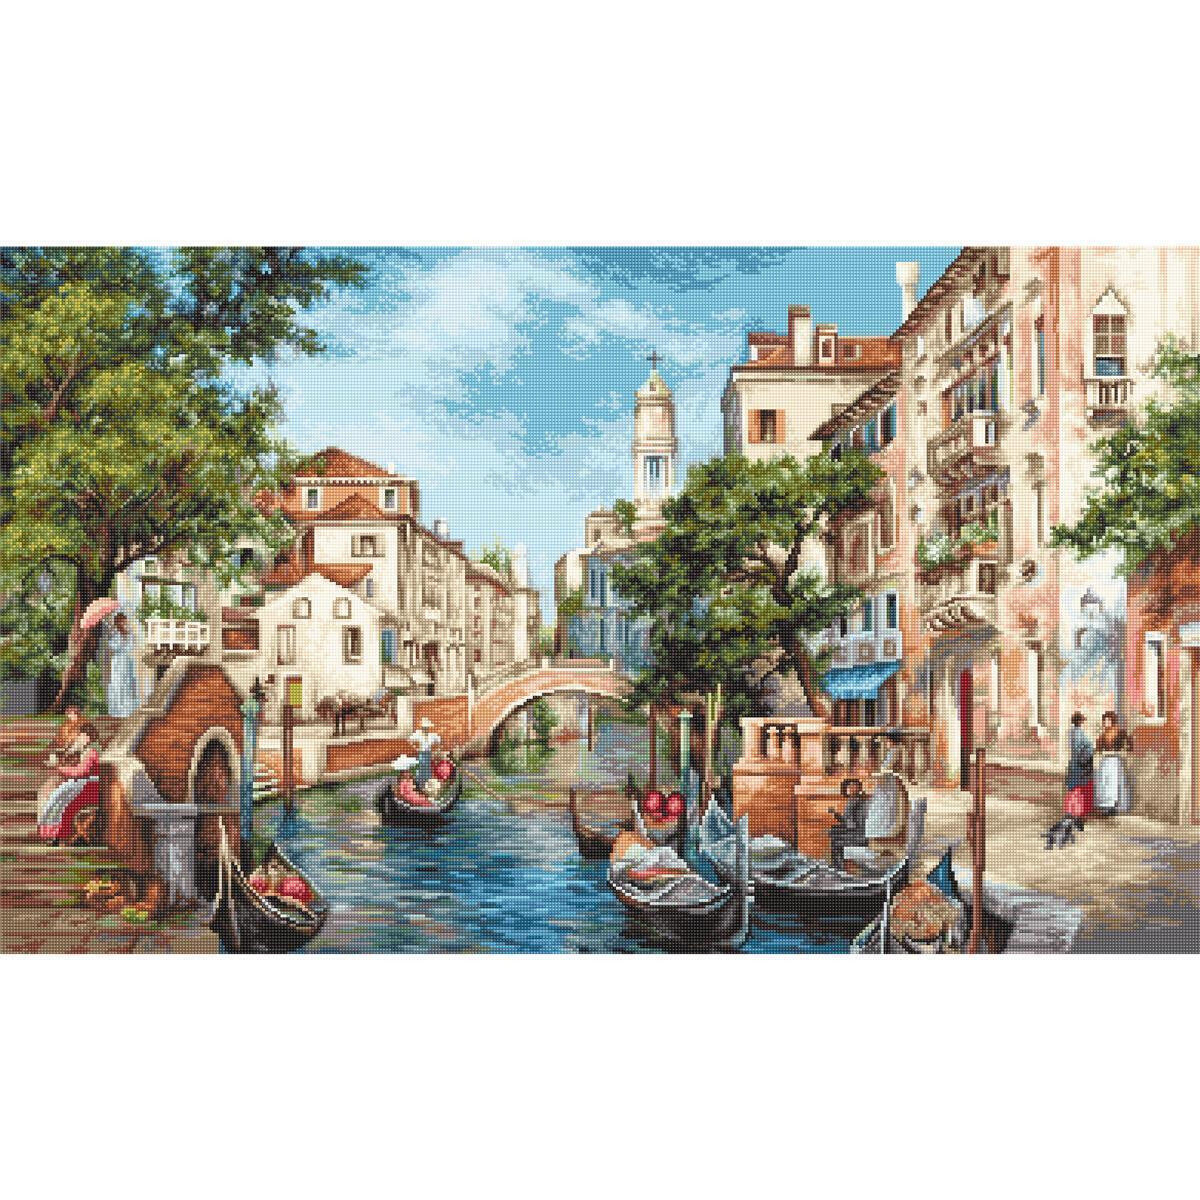 A picturesque canal scene in Venice with gondolas...